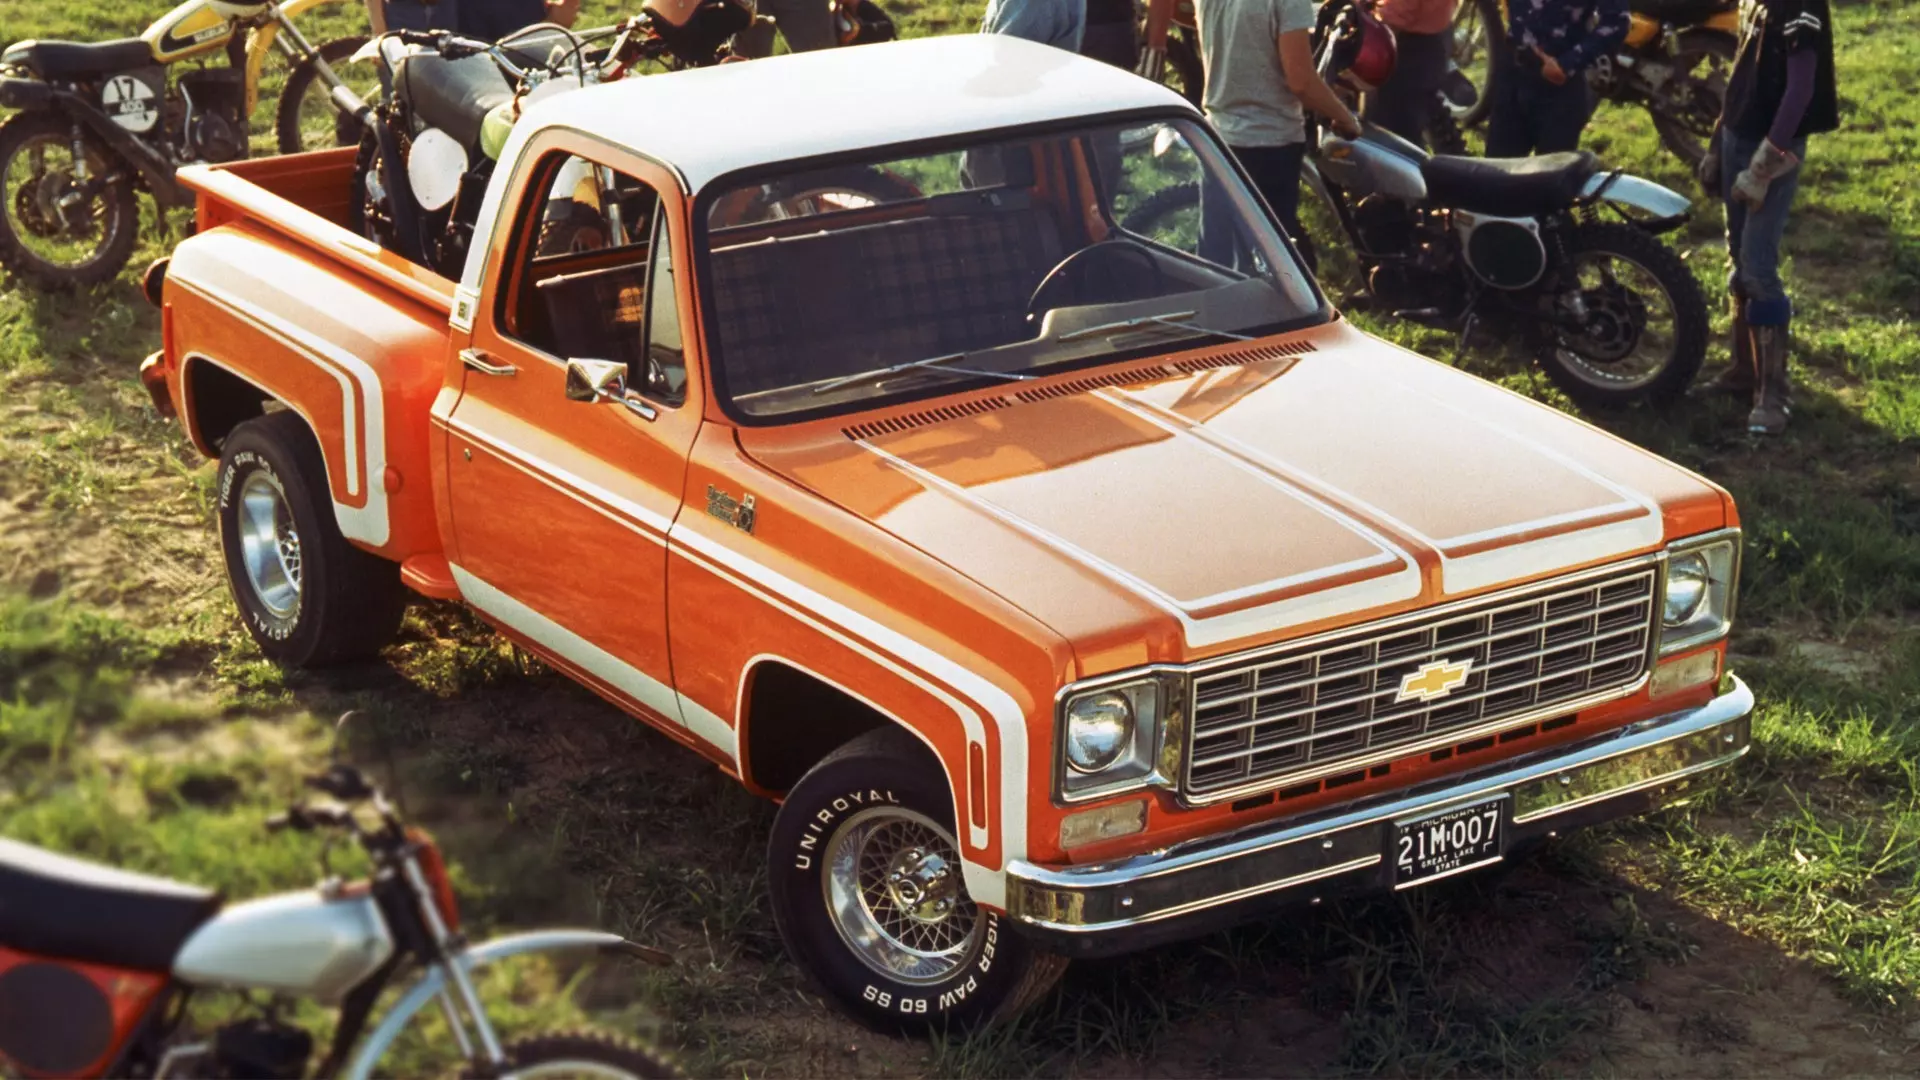 It Doesn’t Get More 1970 Something Than an Orange Stepside Pickup Truck | Autance